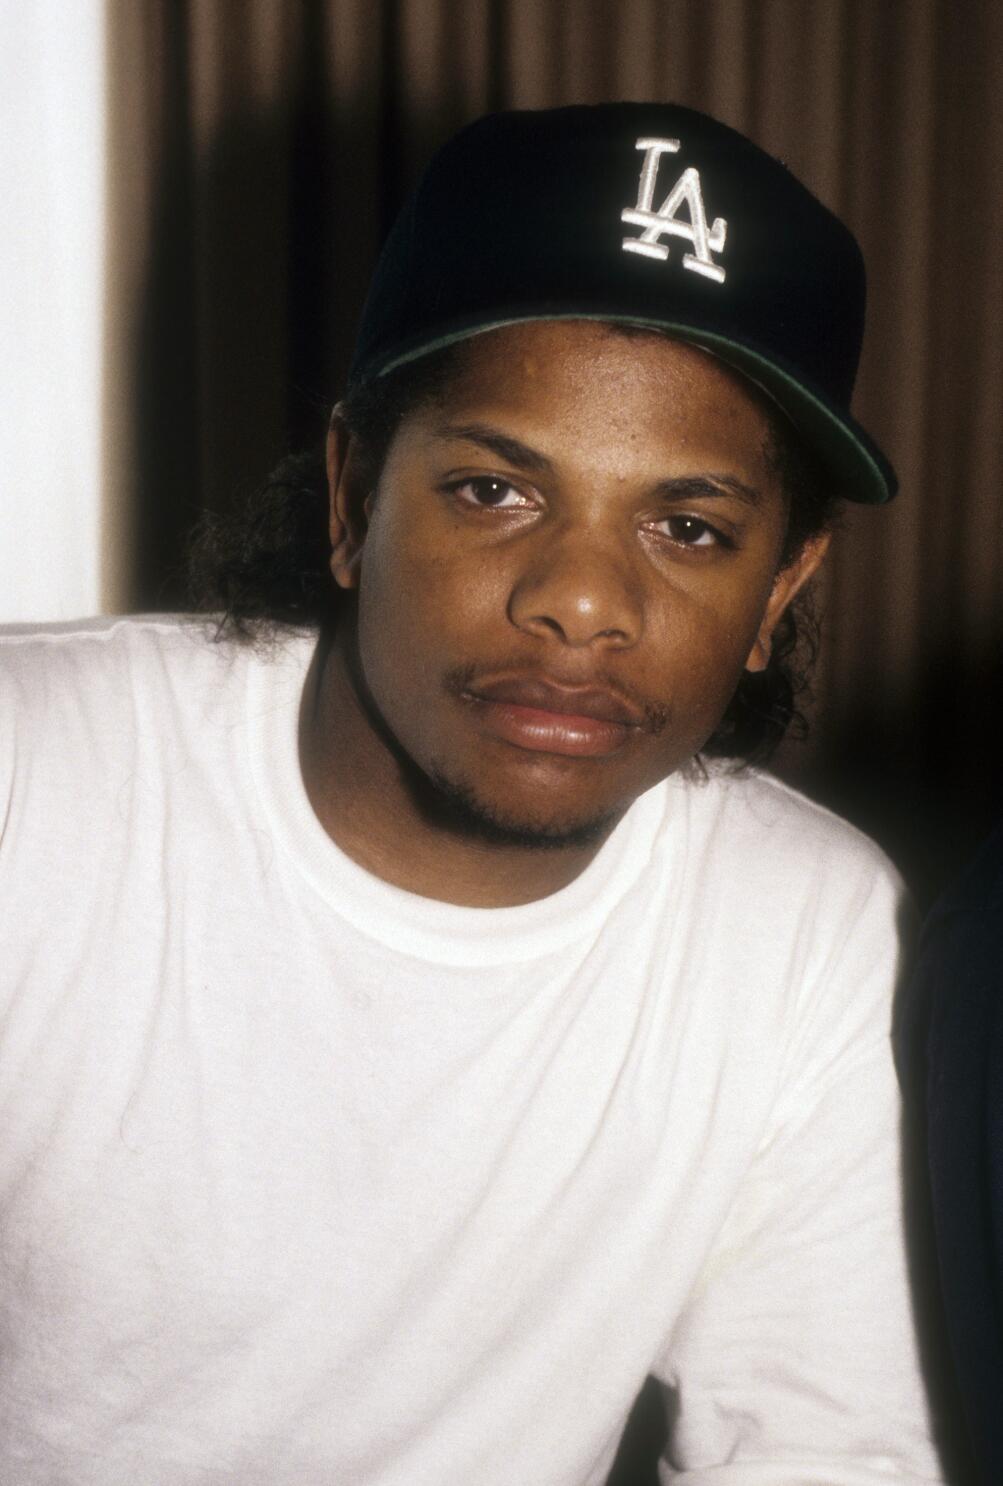 Eazy-E' Is Trending Because People Are Comparing Him To G-Eazy, News